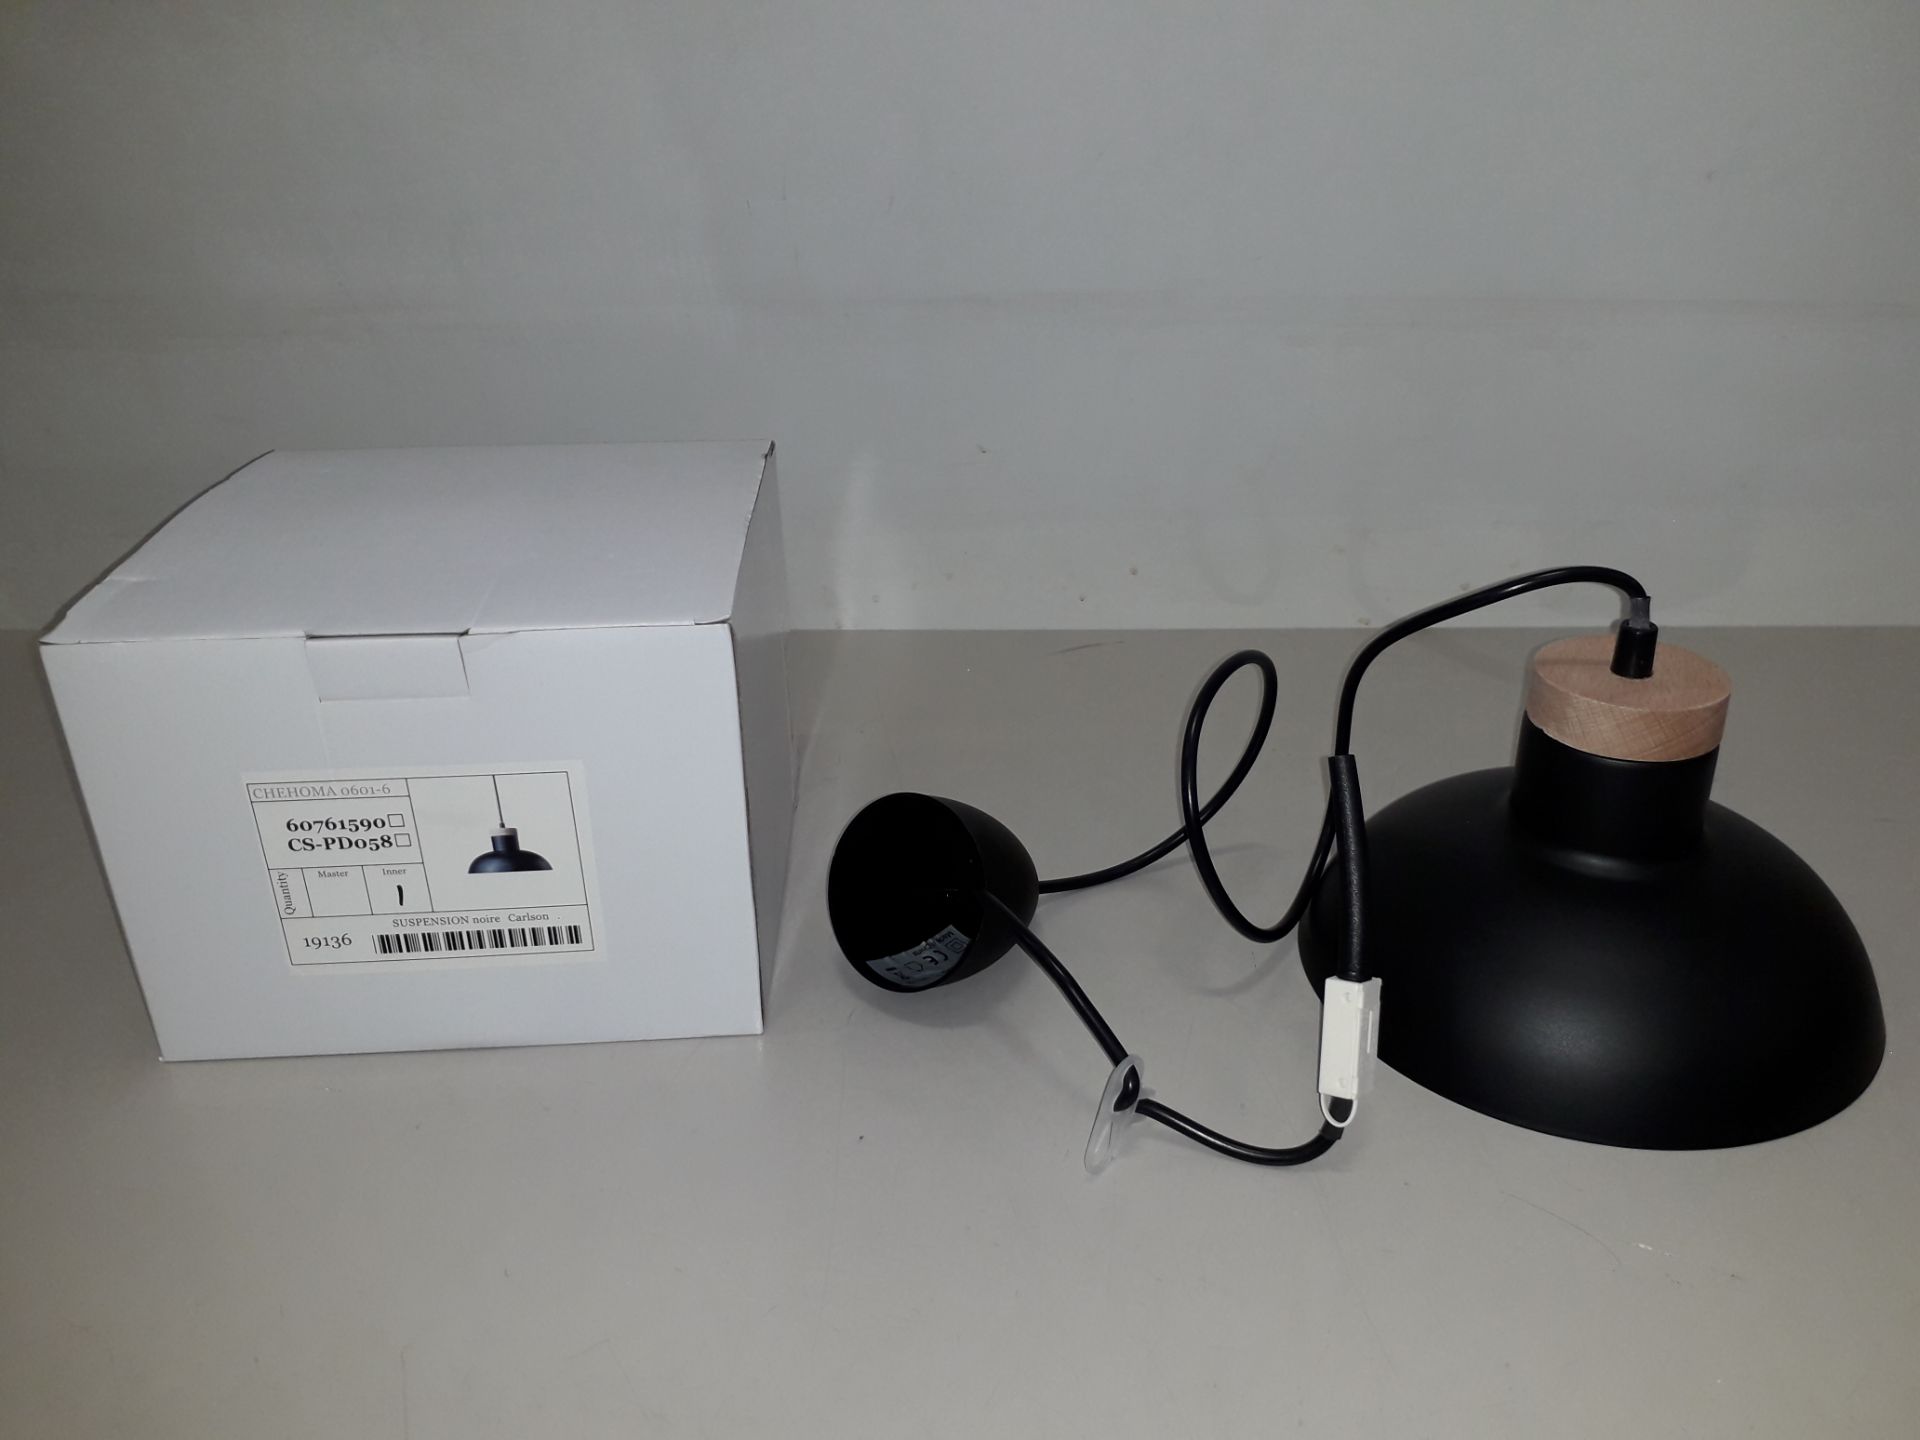 27 X BRAND NEW CEILING LAMPS COMES IN ALL BLACK WITH WOODEN TOP - COMES IN 27 BOXES